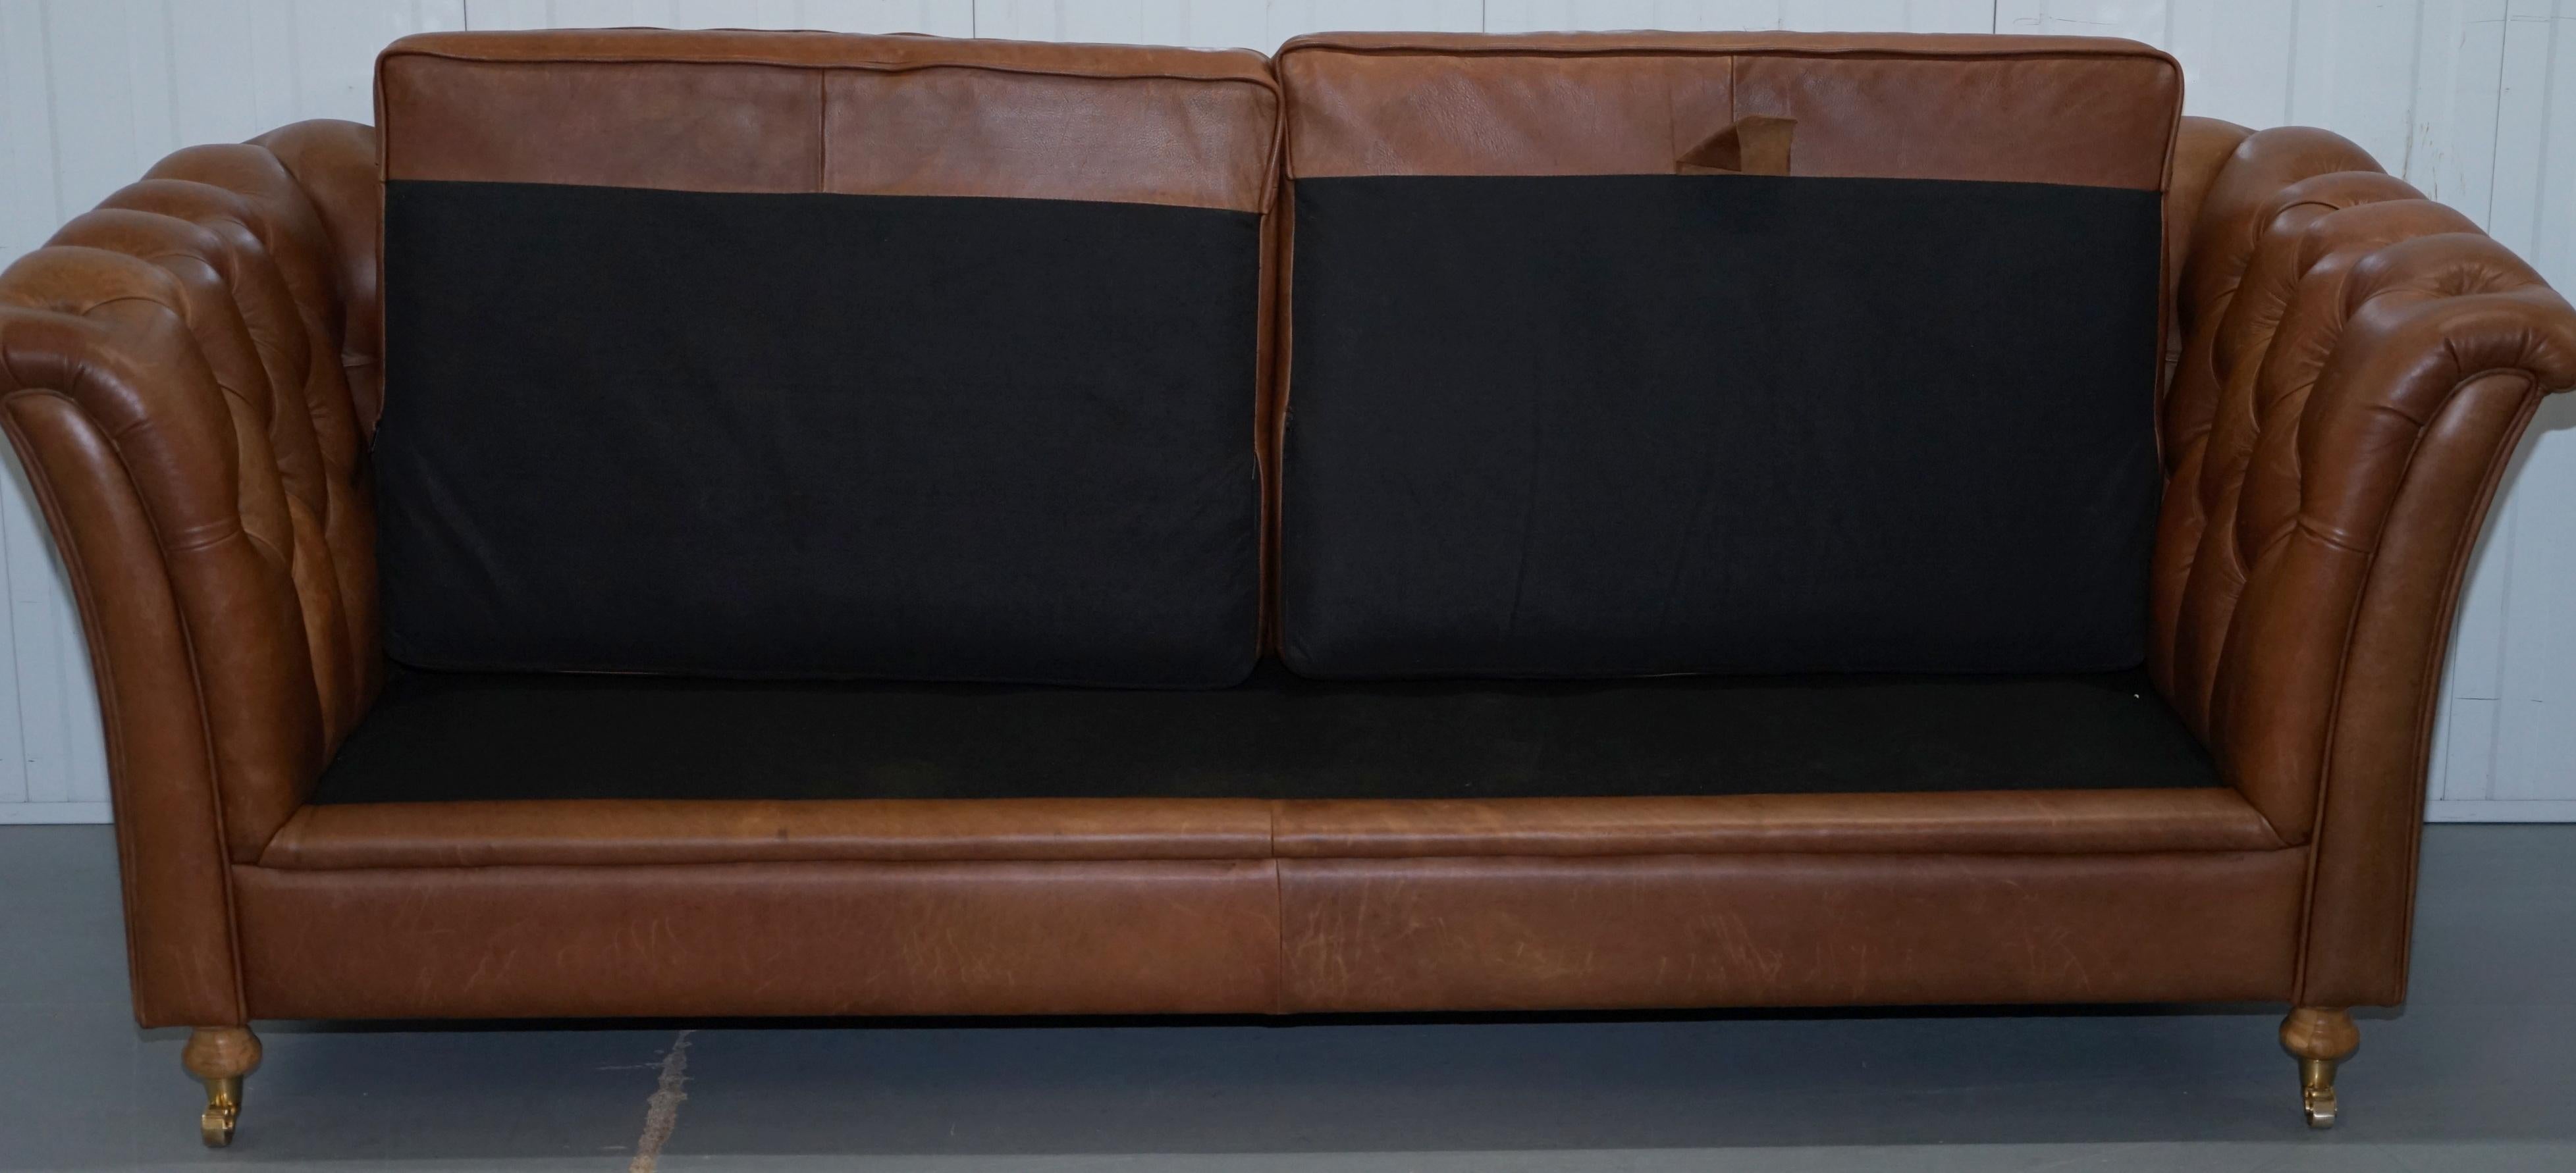 Chestnut Brown Leather Chesterfield Sofa with Turned Oak Legs and Castors 3